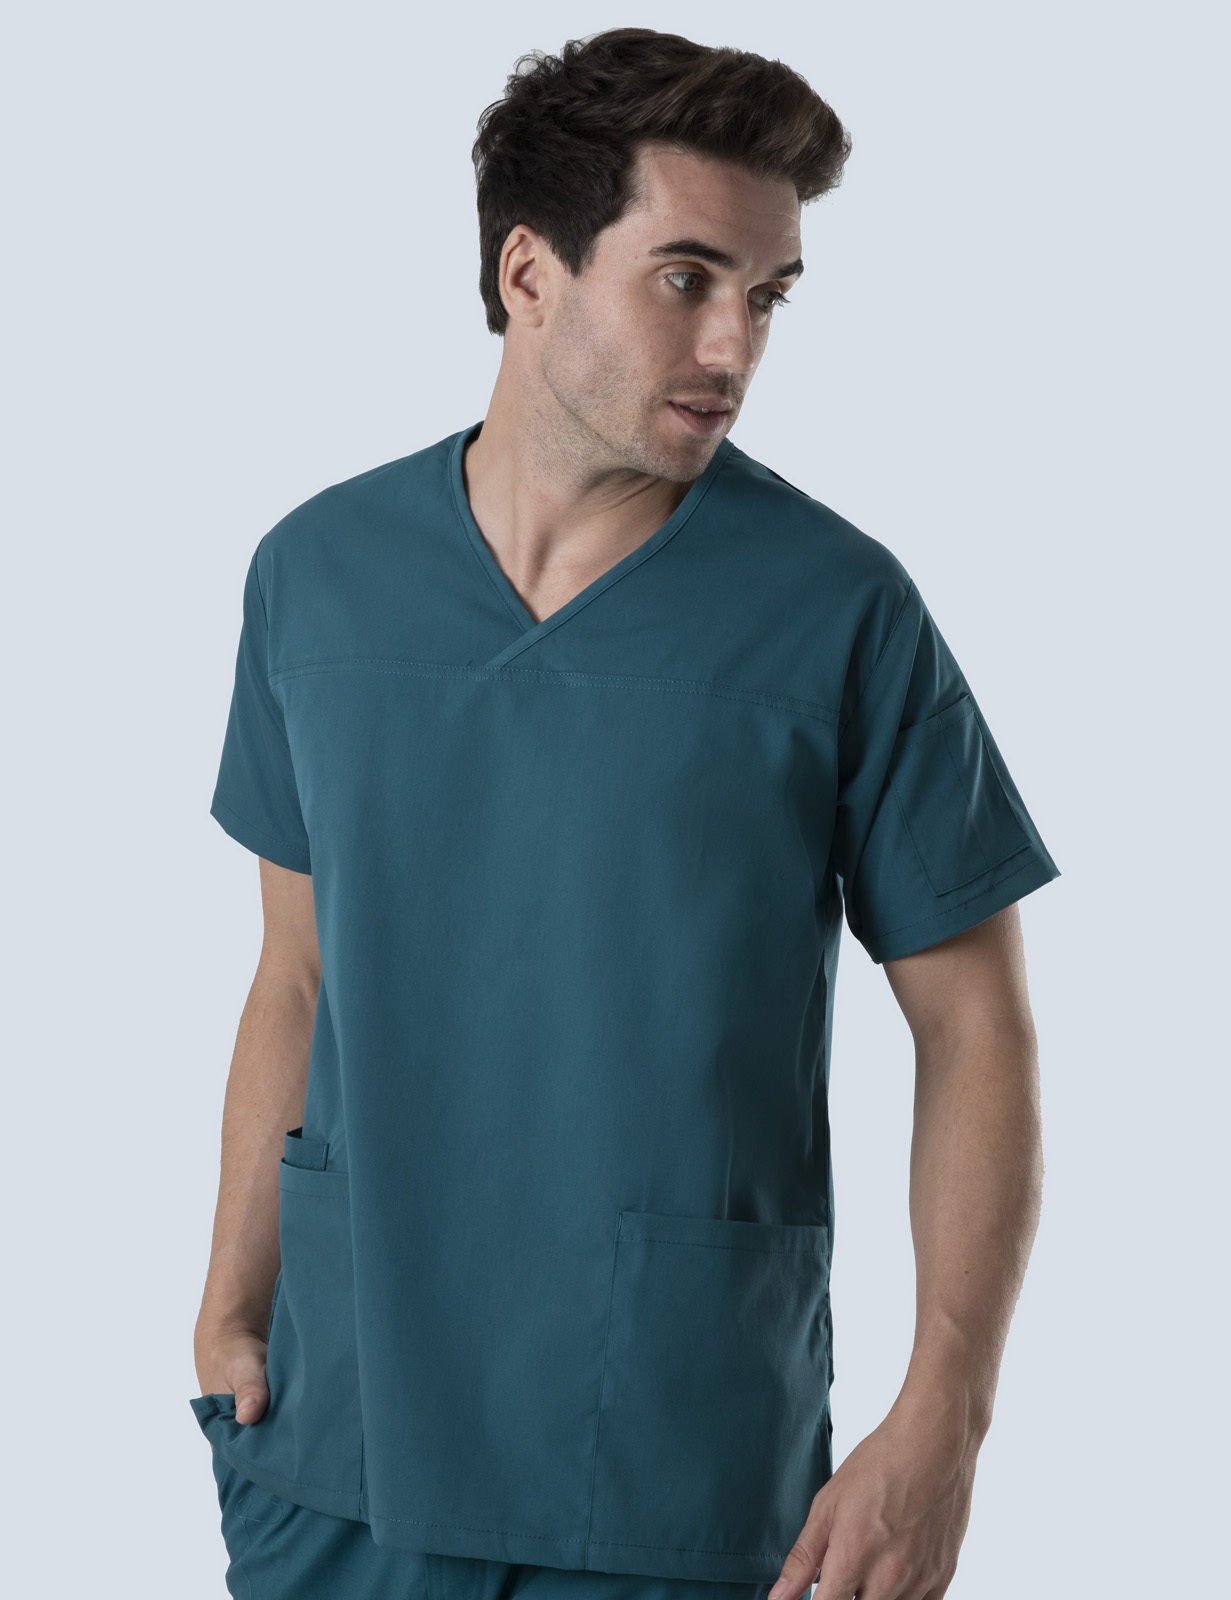 UQ Vets Gatton Anaesthesia Uniform Top Only Bundle (Men's Fit Solid Top in Caribbean incl Logos)